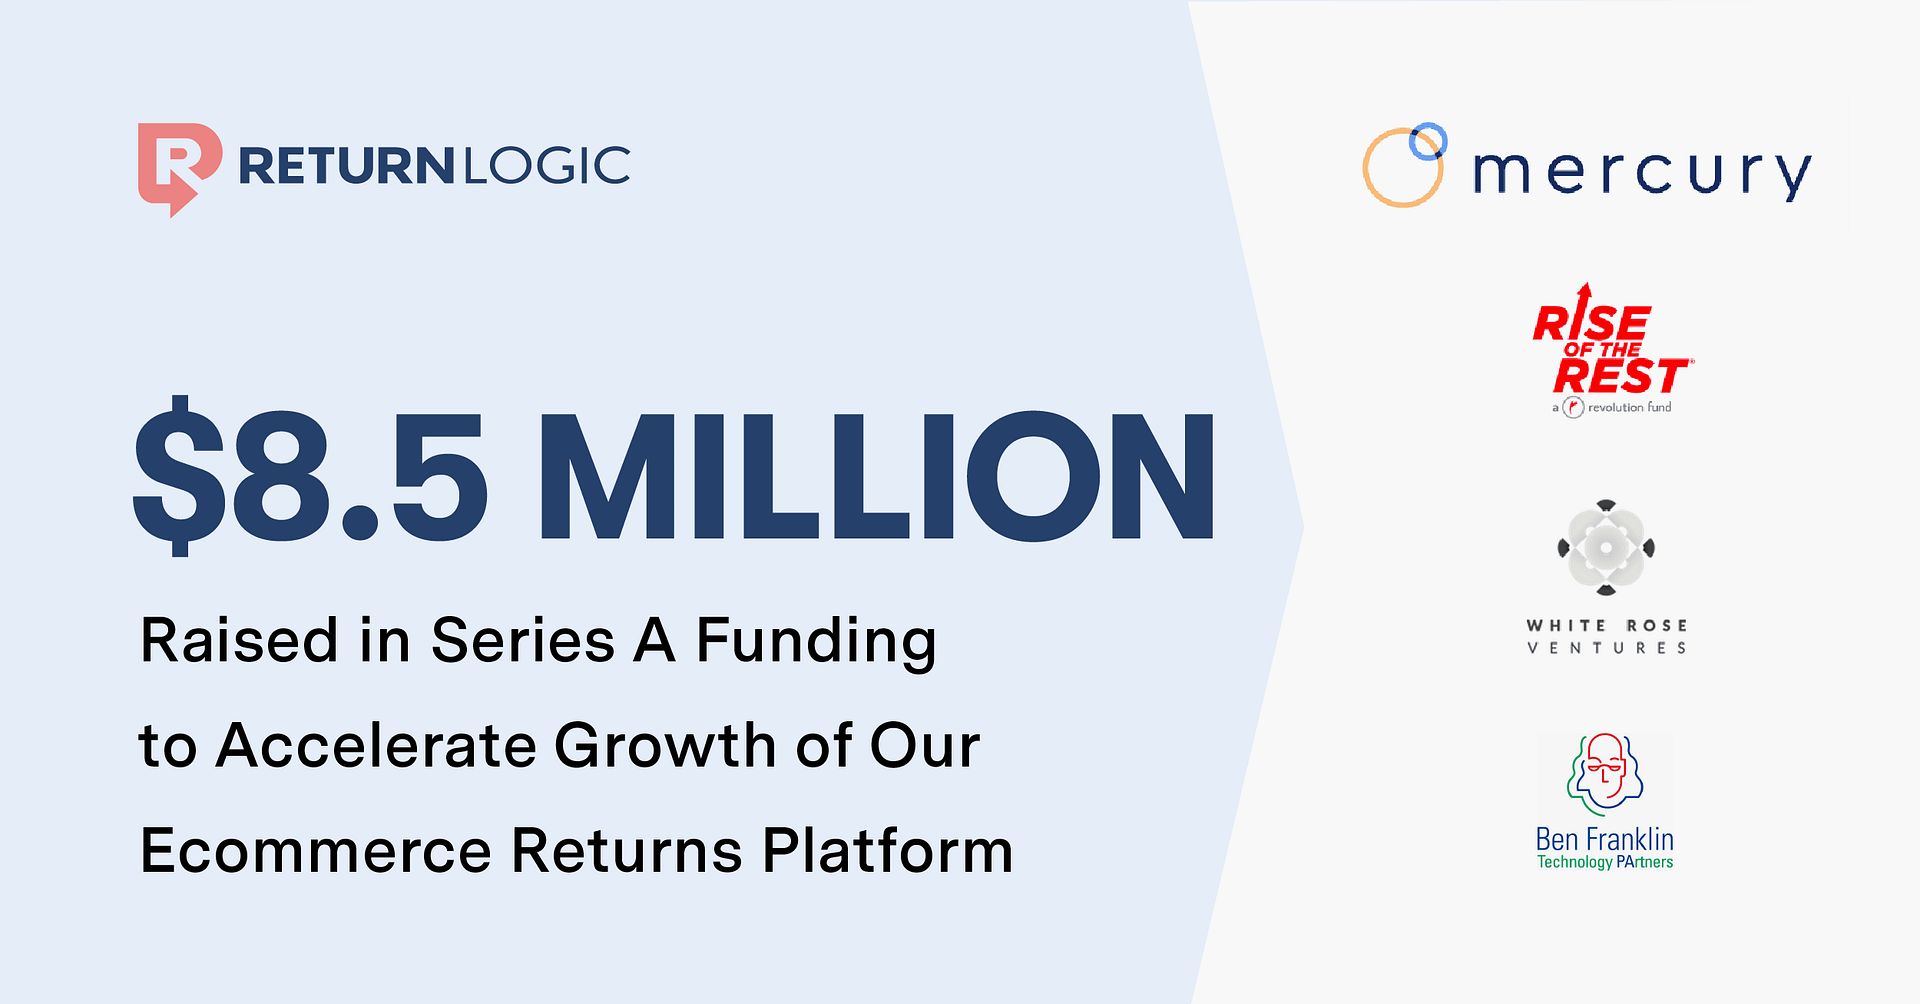 ReturnLogic Raises $8.5 Million in Series A Funding From Mercury and Other Leading Investors